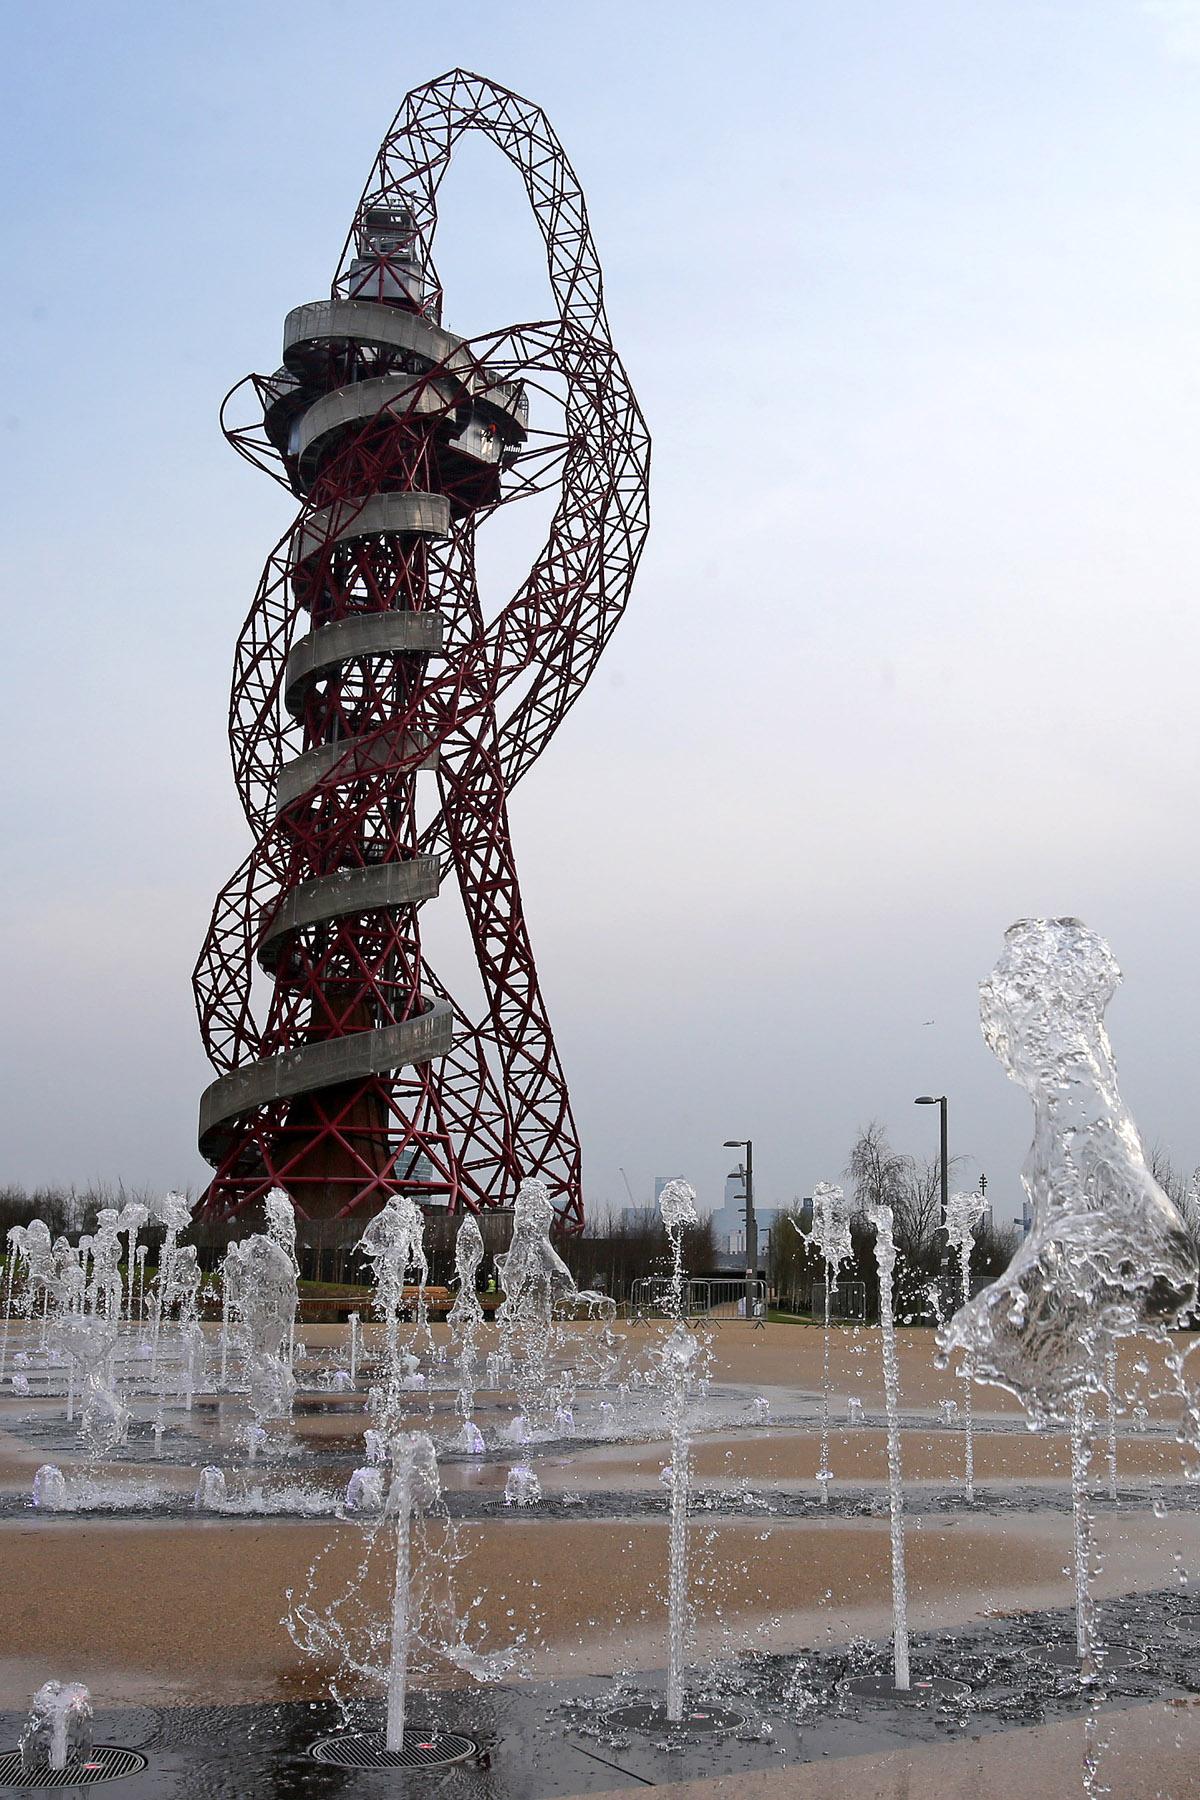 The southern part of Queen Elizabeth Olympic Park includes the Arcelormittal Orbit, Carpenters Lock, fountains and play areas.(28/3/2014) EL76065